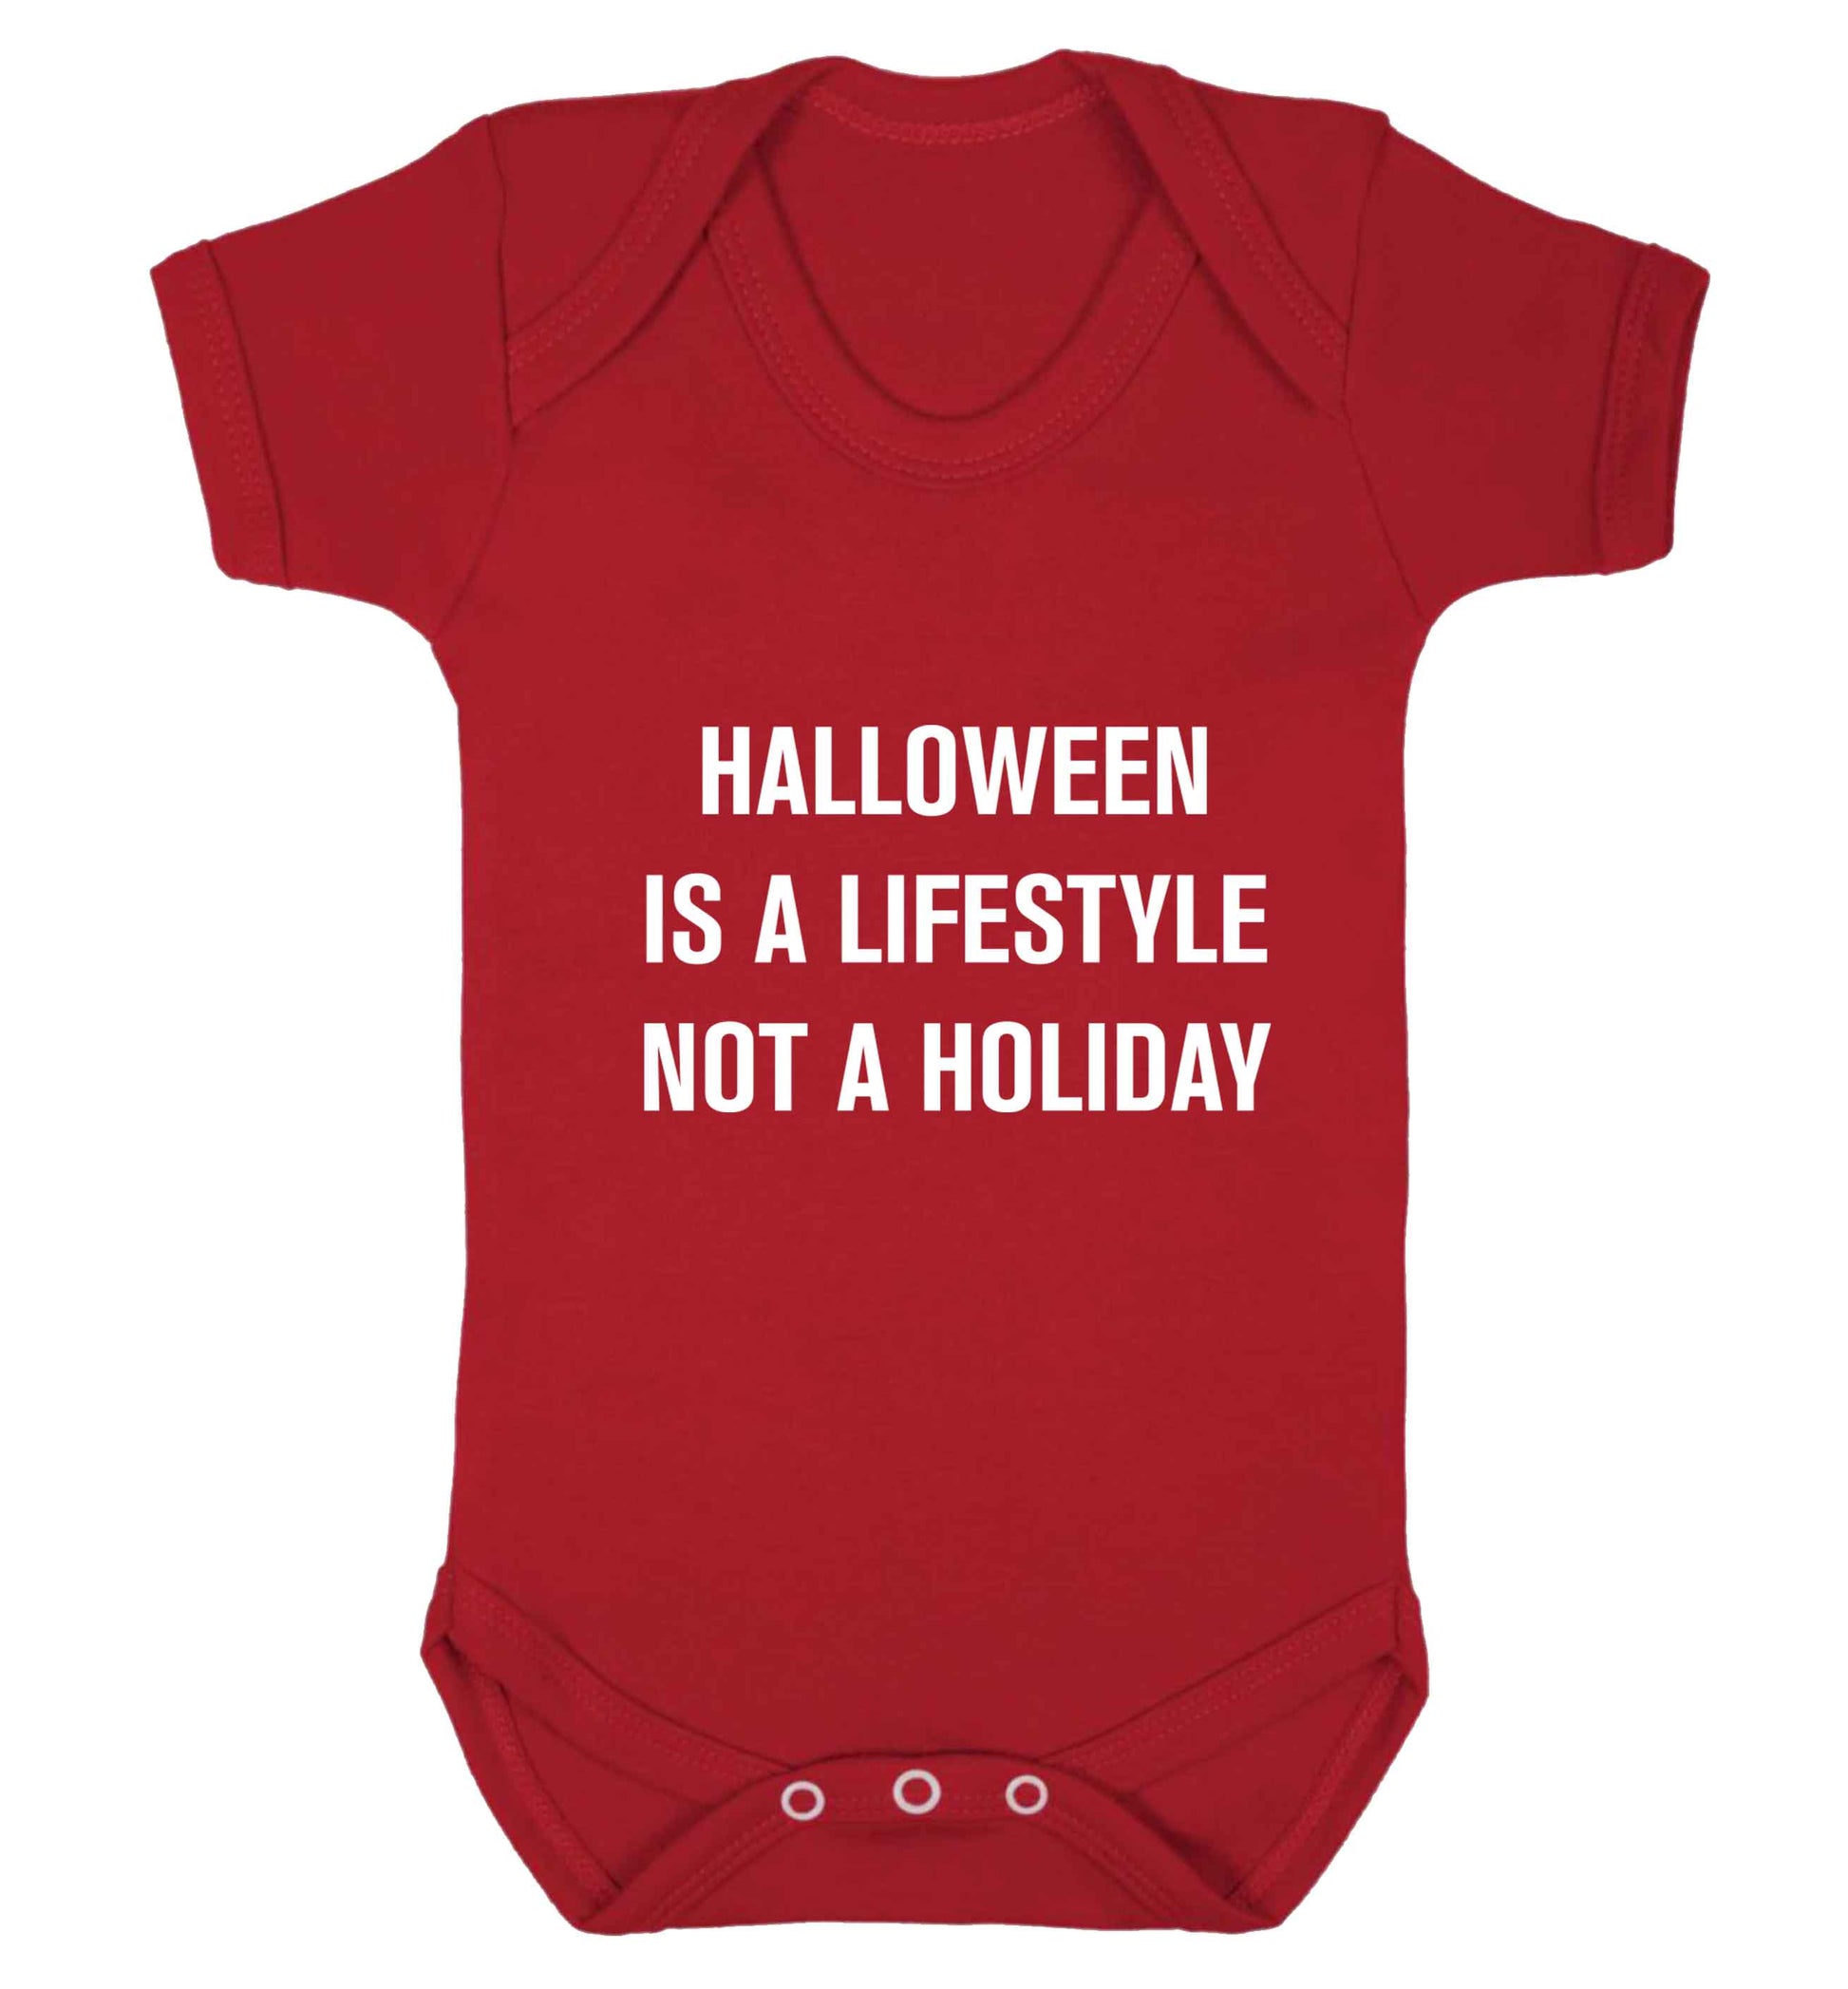 Halloween is a lifestyle not a holiday baby vest red 18-24 months